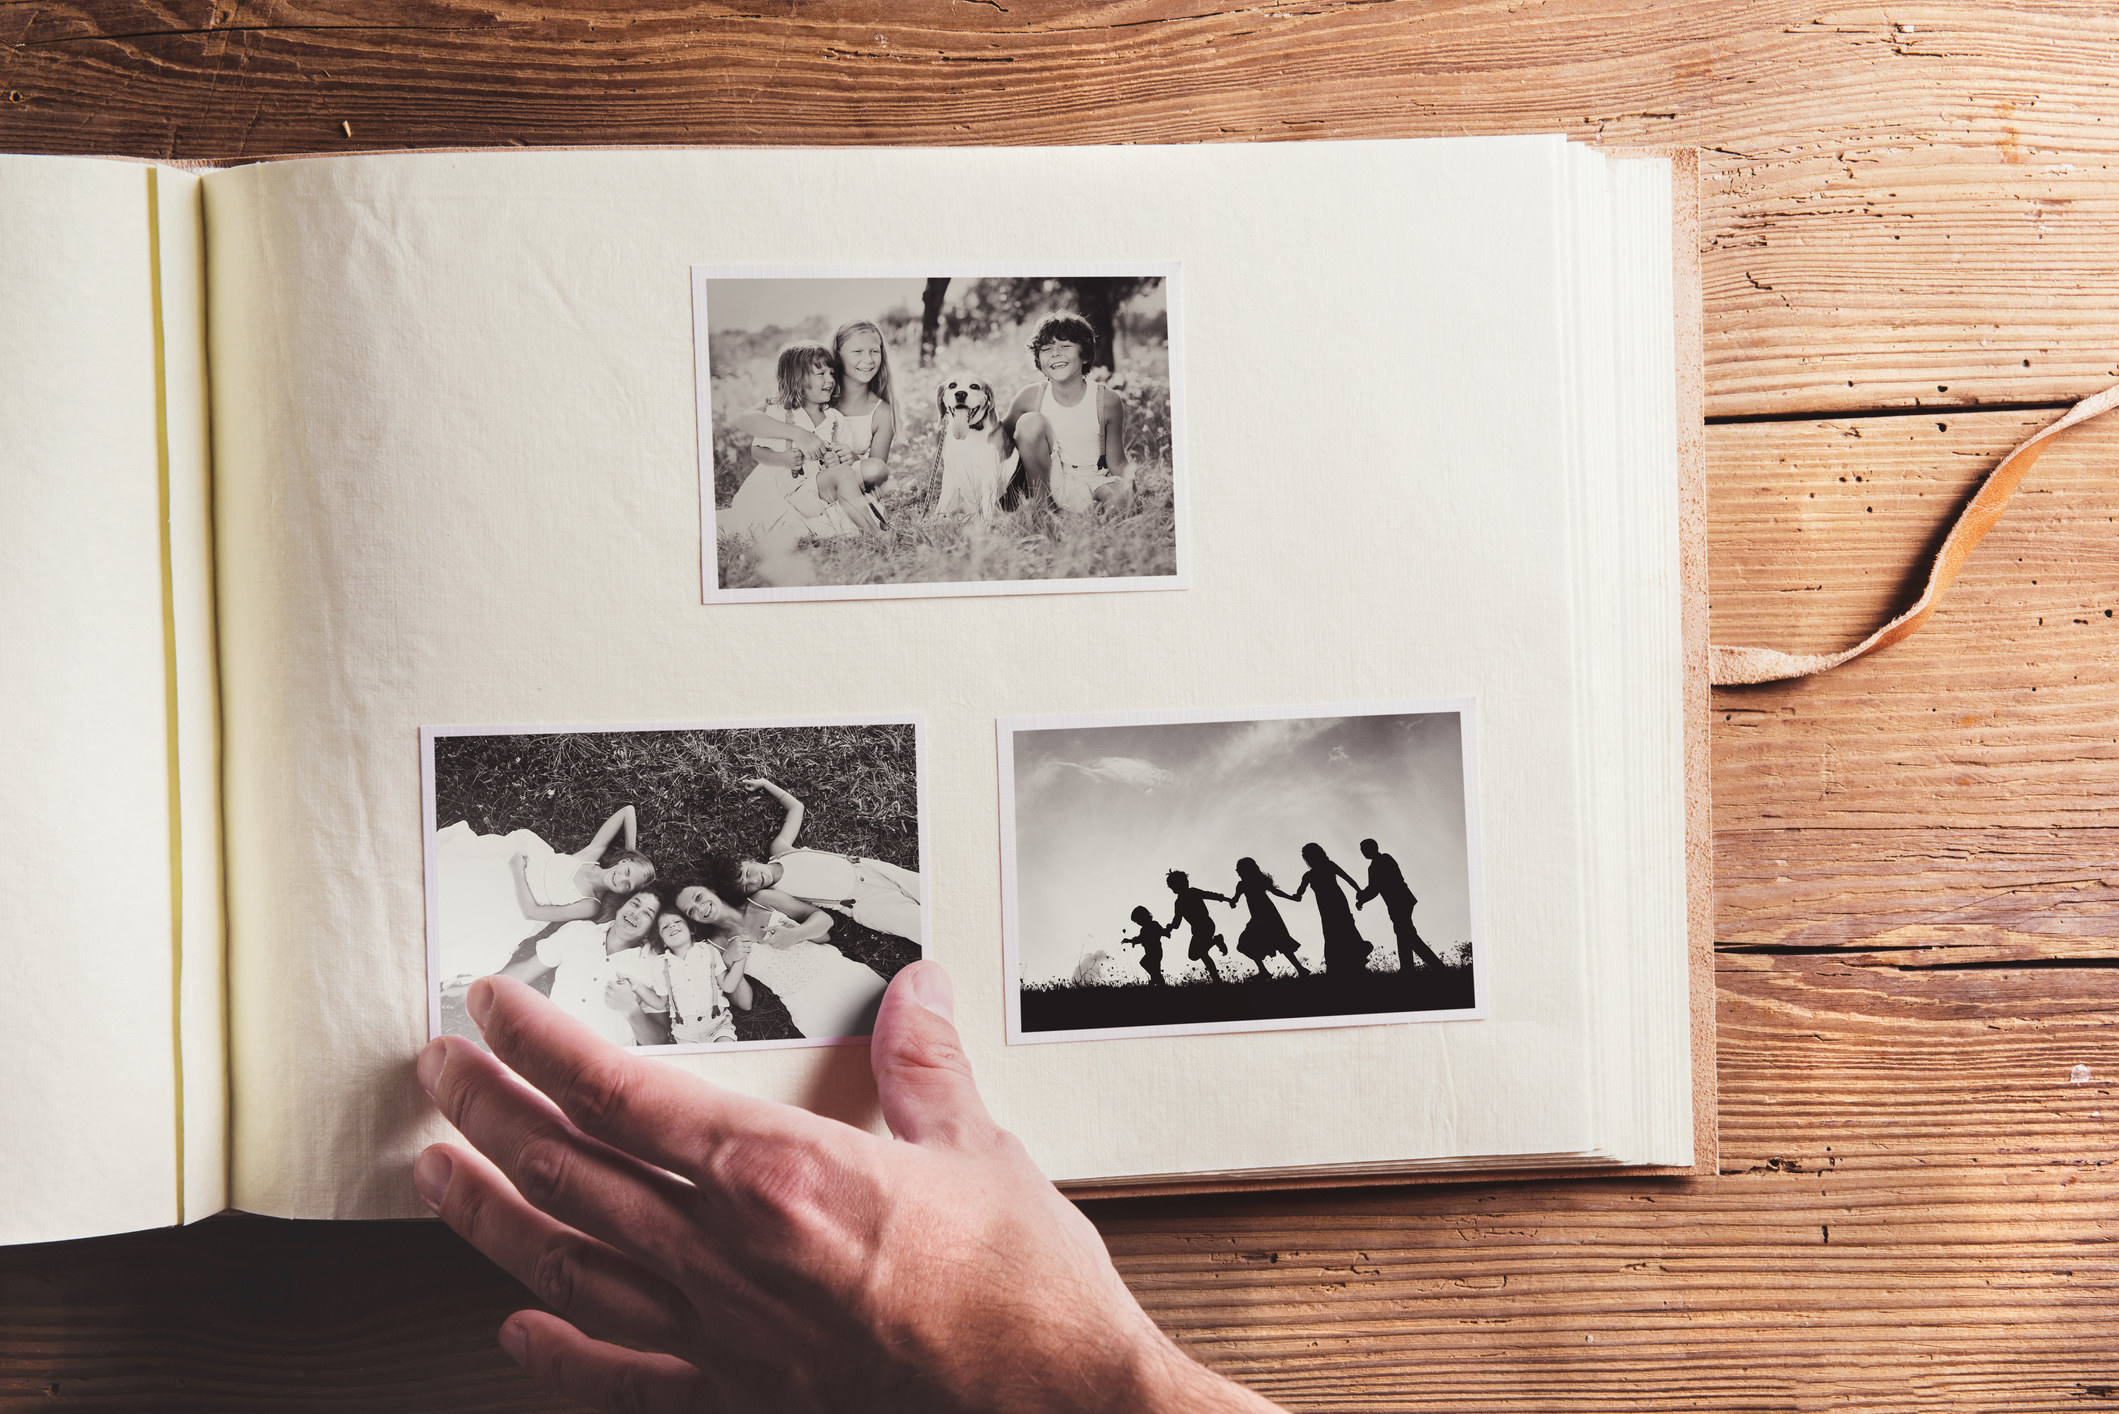 A hand resting on a photo album